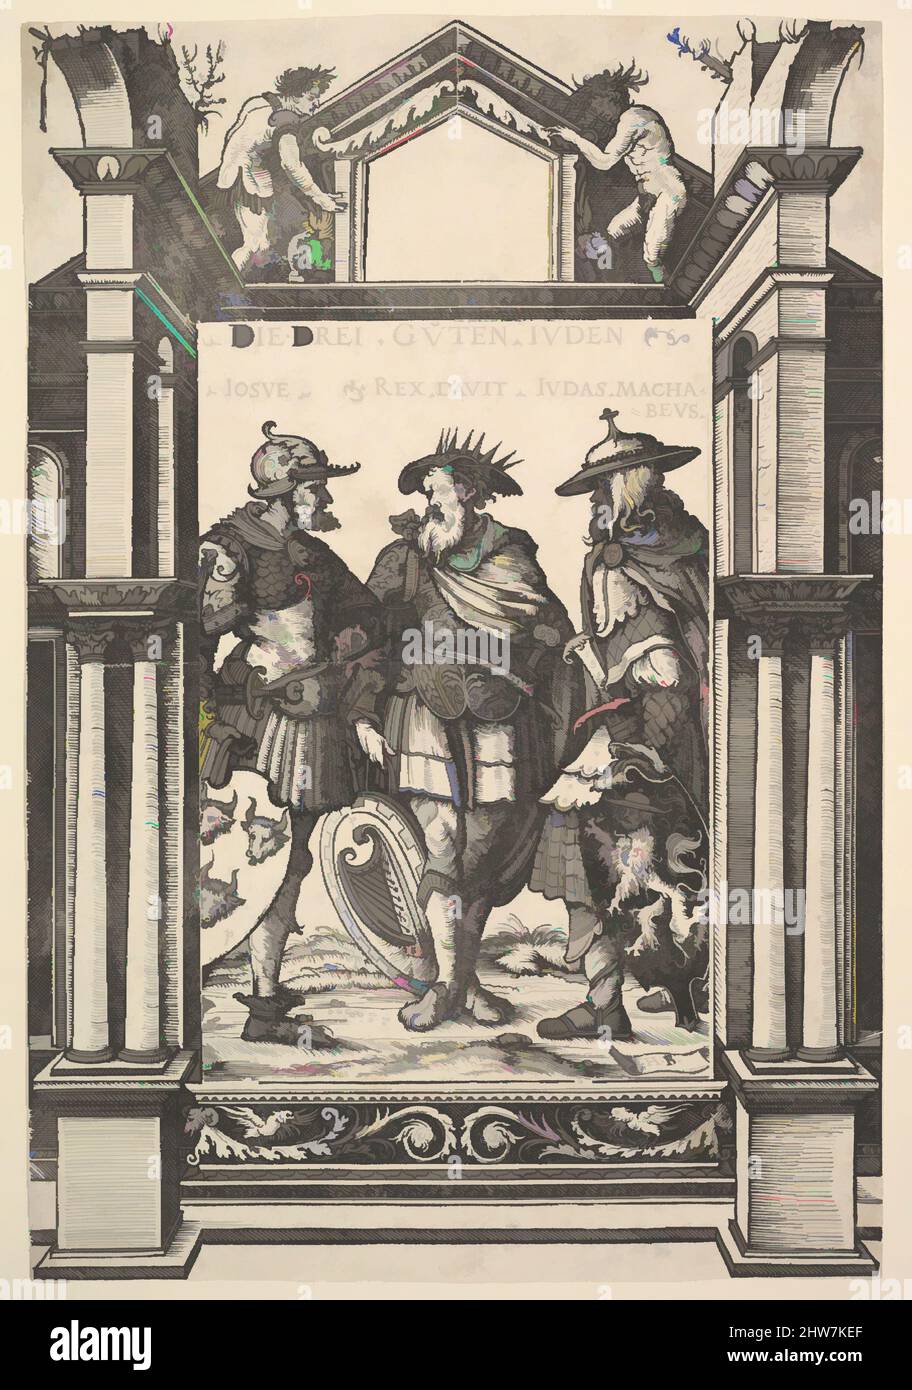 Art inspired by The Three Jewish Heroes (Die Drei Guten Juden), from Heroes and Heroines, 1516, Woodcut; second state of three (Hollstein), Sheet: 12 5/8 × 8 7/16 in. (32 × 21.5 cm), Prints, Hans Burgkmair (German, Augsburg 1473–1531 Augsburg), Border by Hans Weiditz the Younger (, Classic works modernized by Artotop with a splash of modernity. Shapes, color and value, eye-catching visual impact on art. Emotions through freedom of artworks in a contemporary way. A timeless message pursuing a wildly creative new direction. Artists turning to the digital medium and creating the Artotop NFT Stock Photo